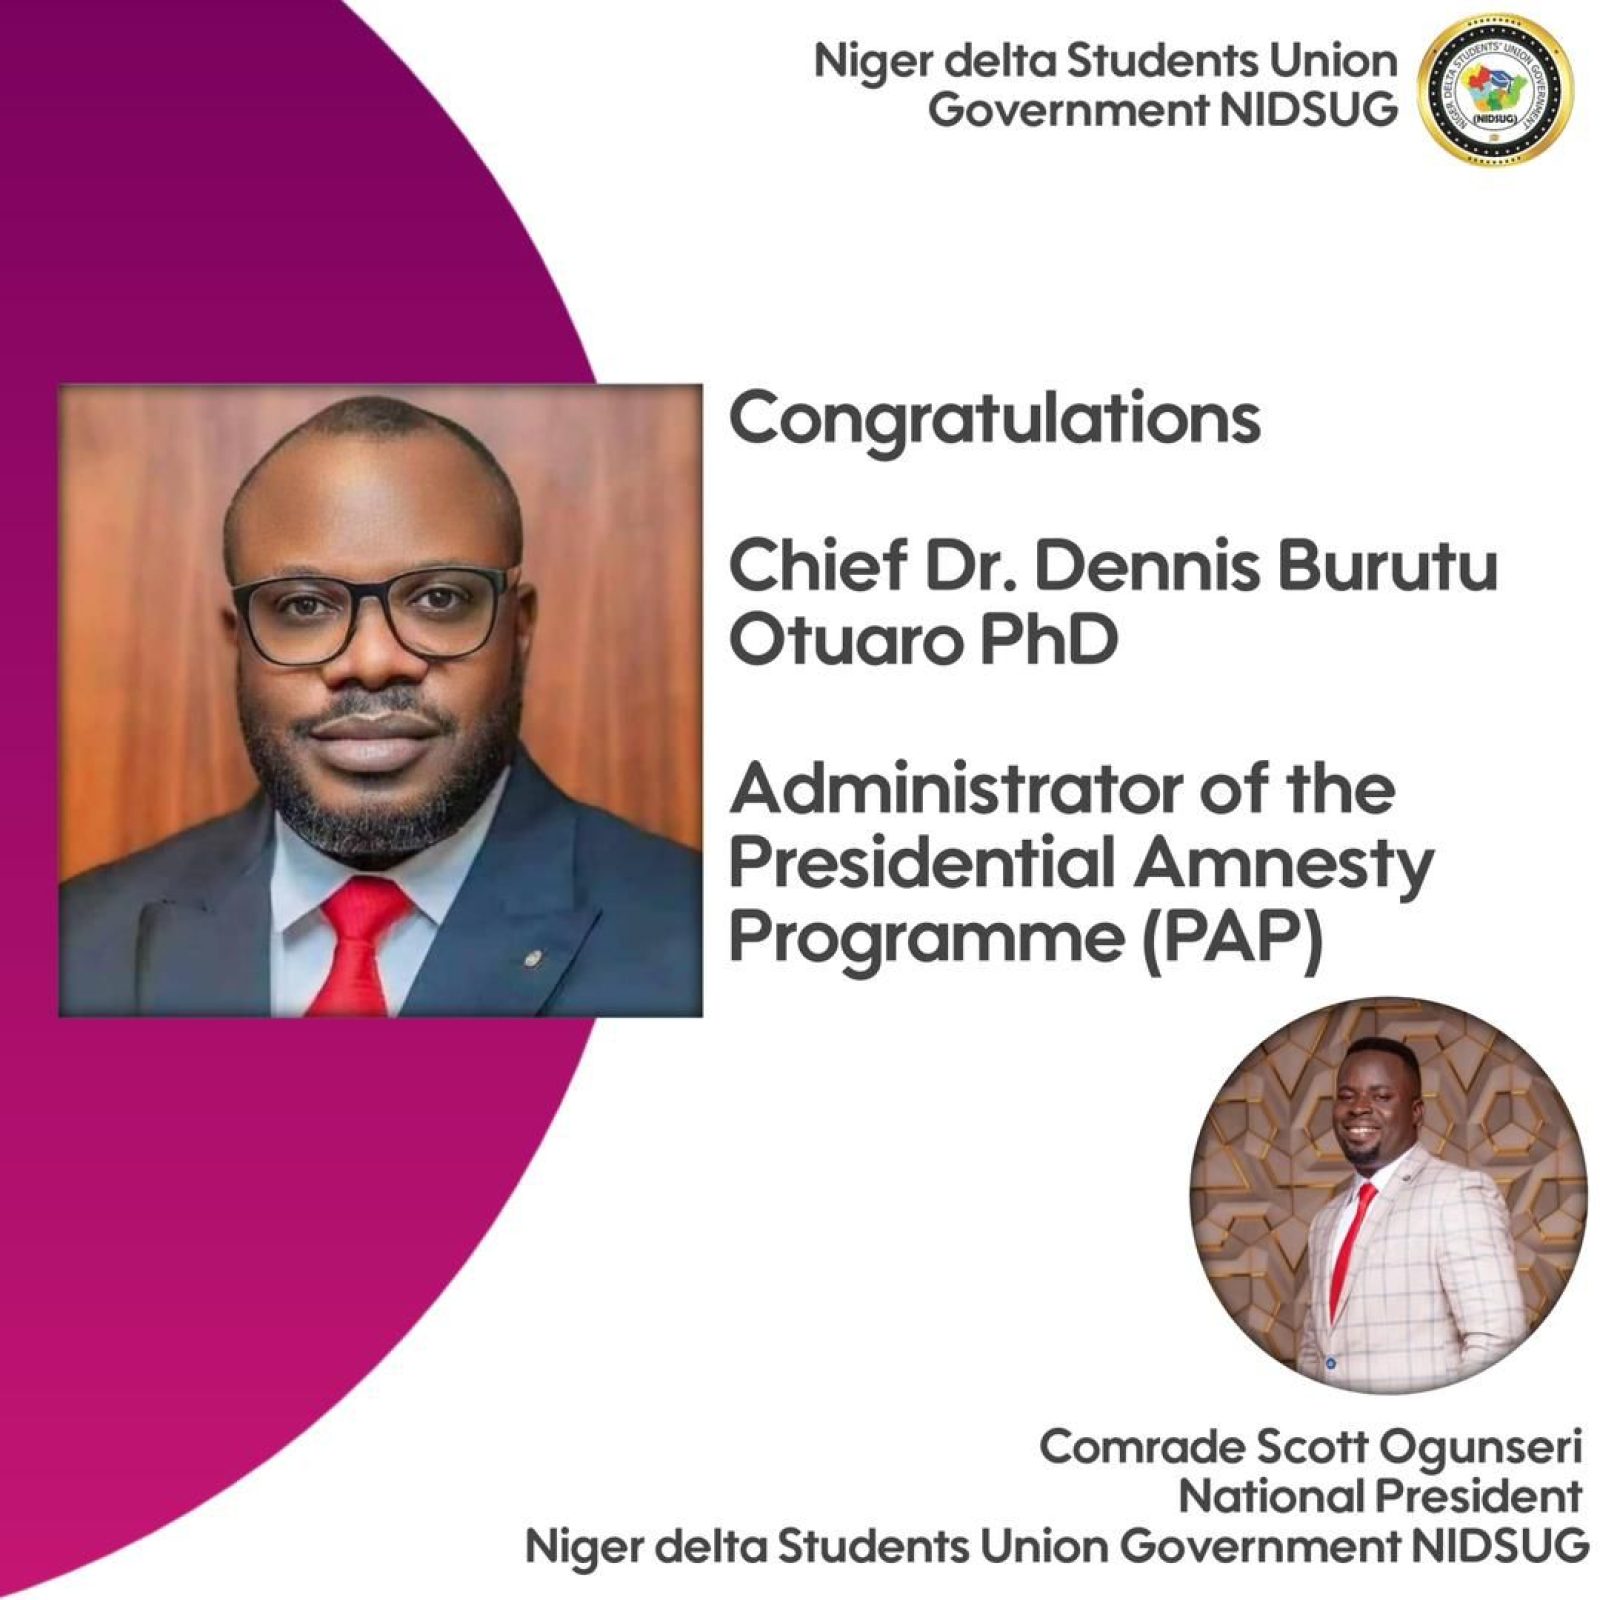 NIDSUG SENDS CONGRATULATORY MESSAGE TO HIGH CHIEF DR. DENNIS OTUARO PhD ON HIS RECENT APPOINTMENT AS ADMINISTRATOR OF THE PRESIDENTIAL AMNESTY PROGRAMME (PAP) BY PRESIDENT BOLA AHMED TINUBU, GCFR.